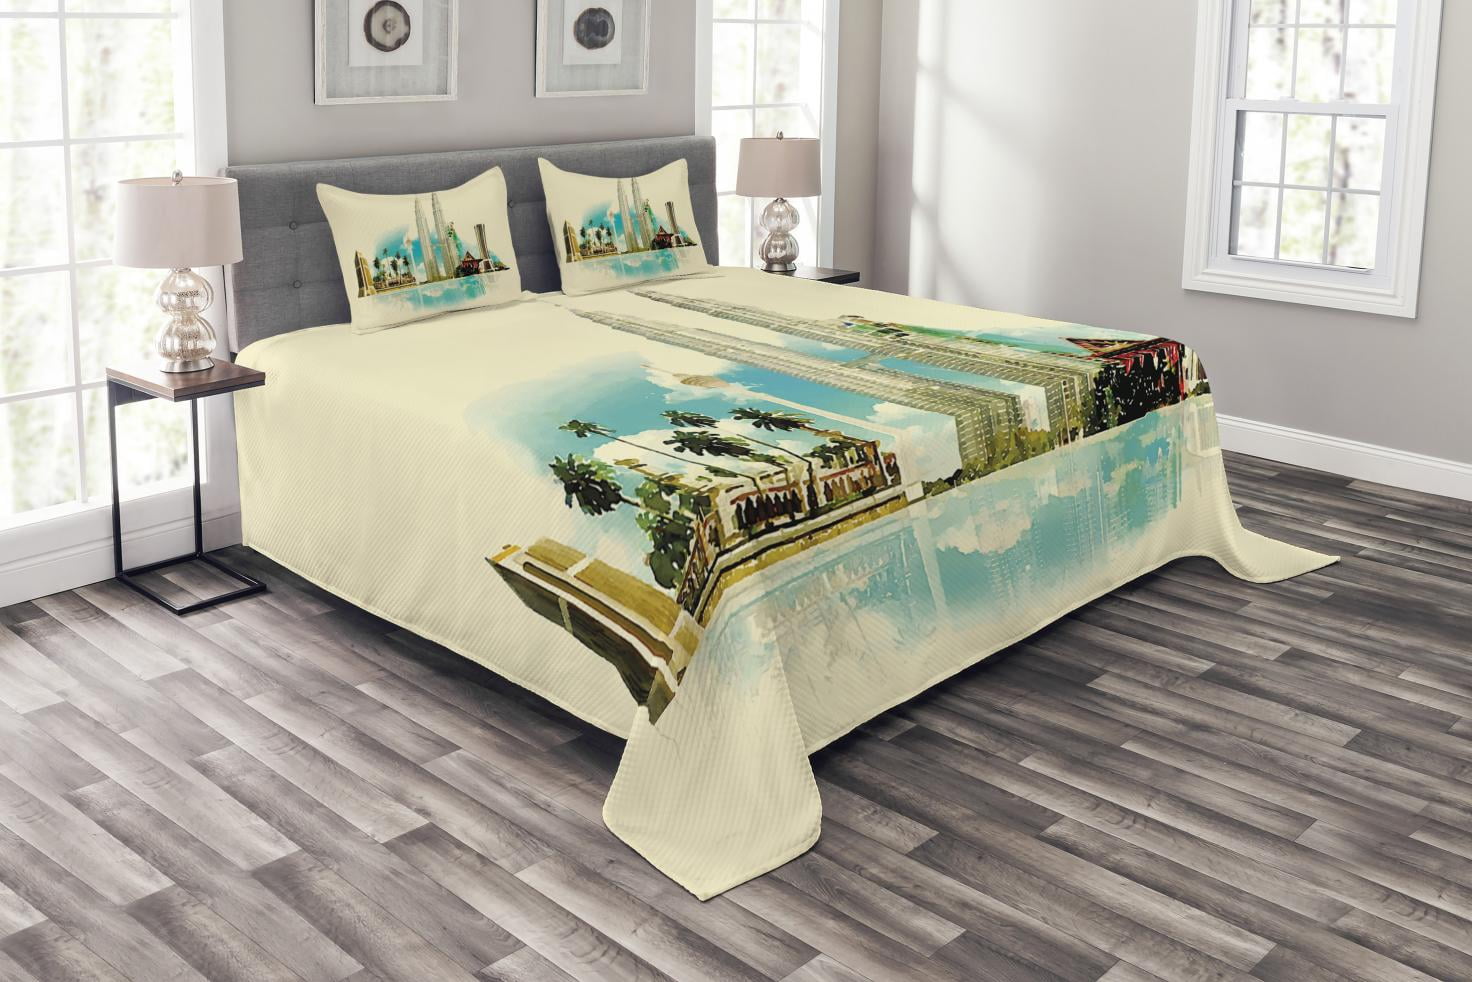 Details about   Asian Quilted Bedspread & Pillow Shams Set East Kuala City Palms Print 